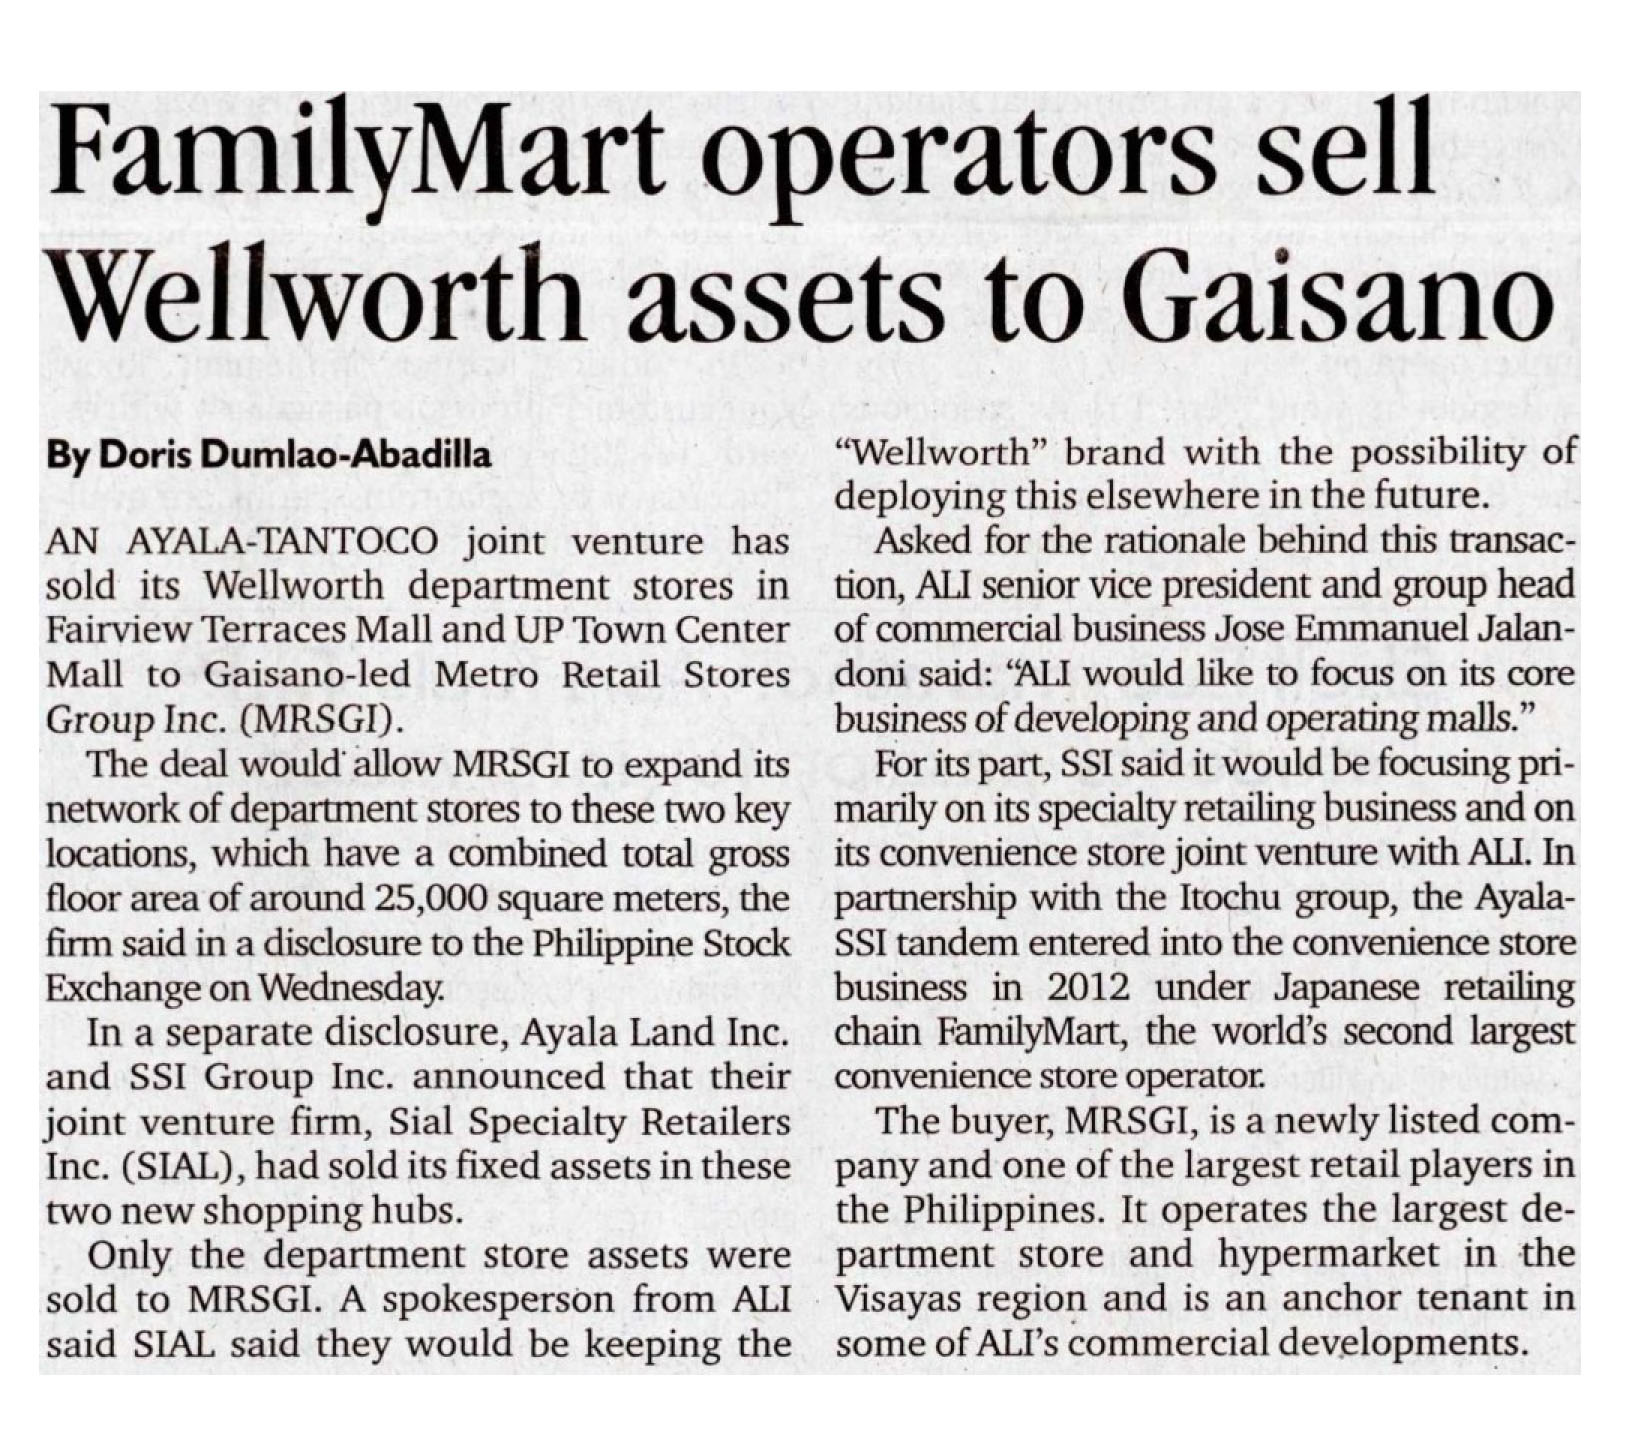 FamilyMart operators sell Wellworth assets to Gaisano Philippine Daily Inquirer